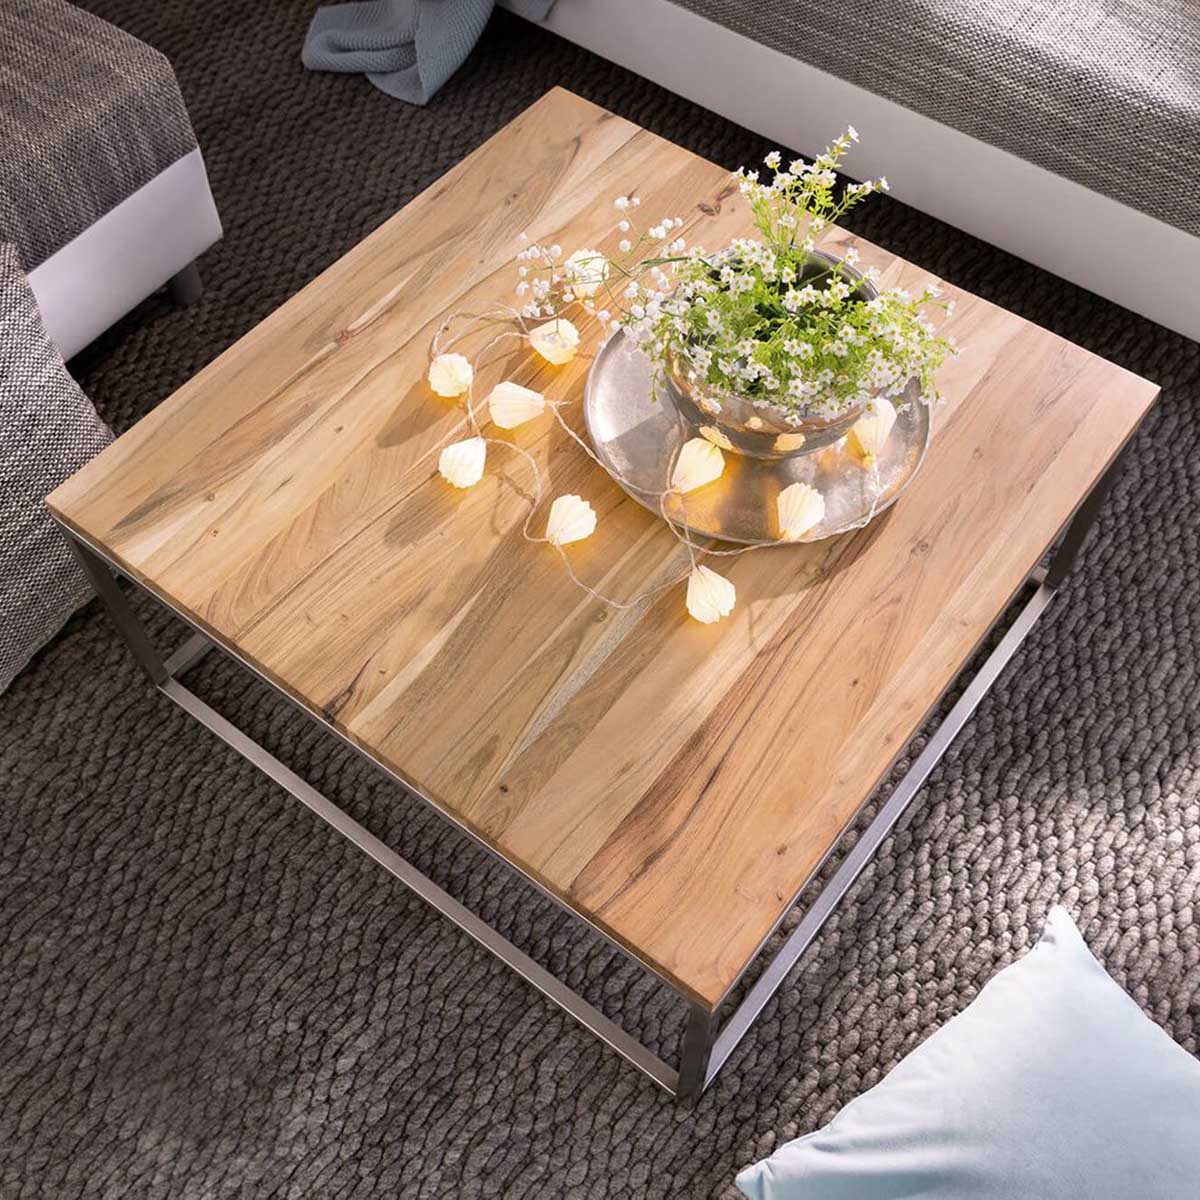 How To Build A Square Coffee Table